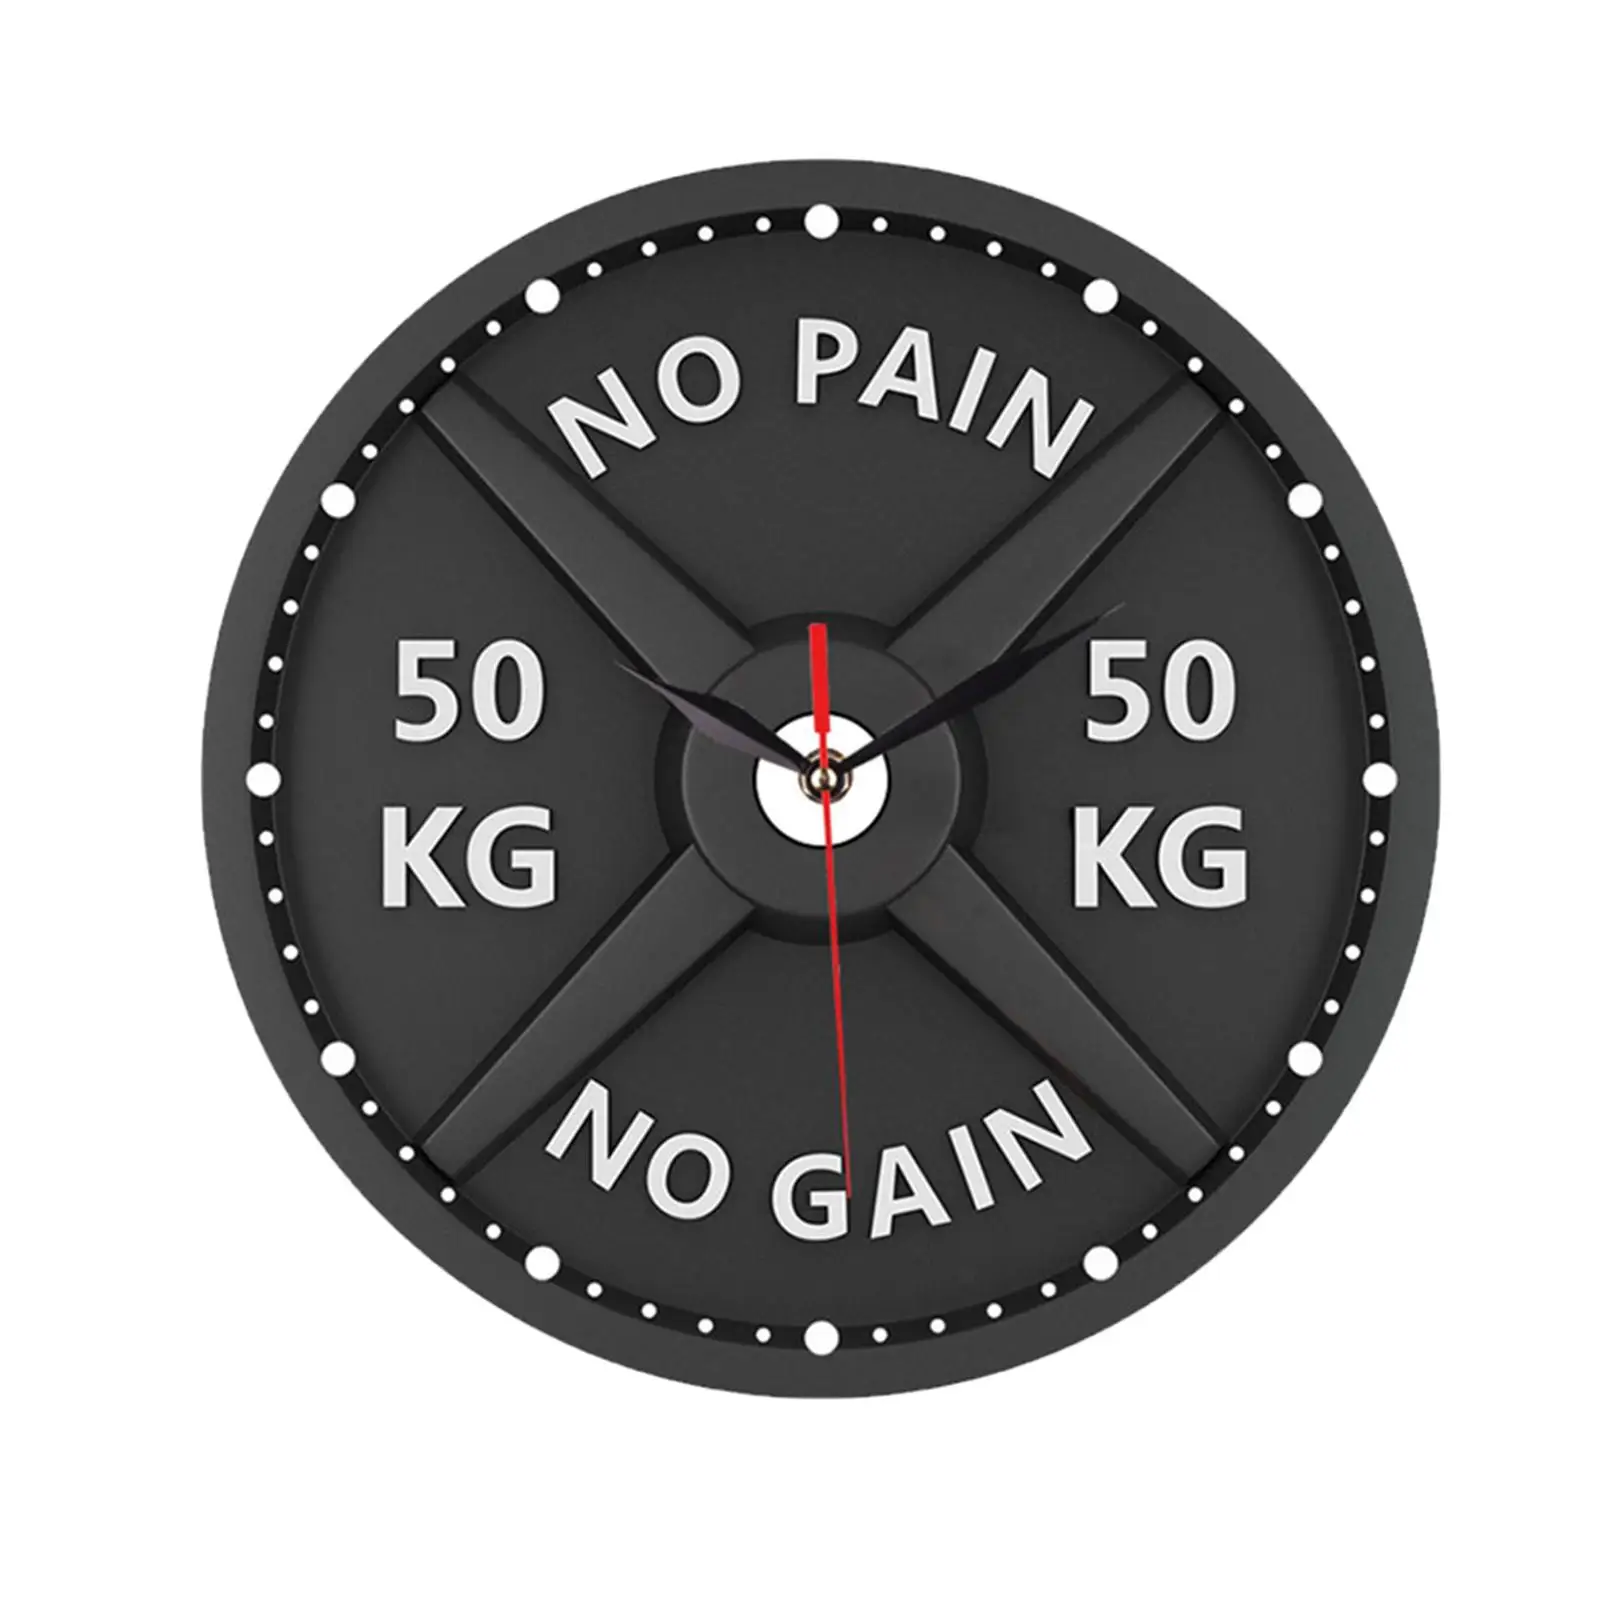 Barbell Wall Clock Silent Decorative Clock for Home Gym Fitness Bodybuilding